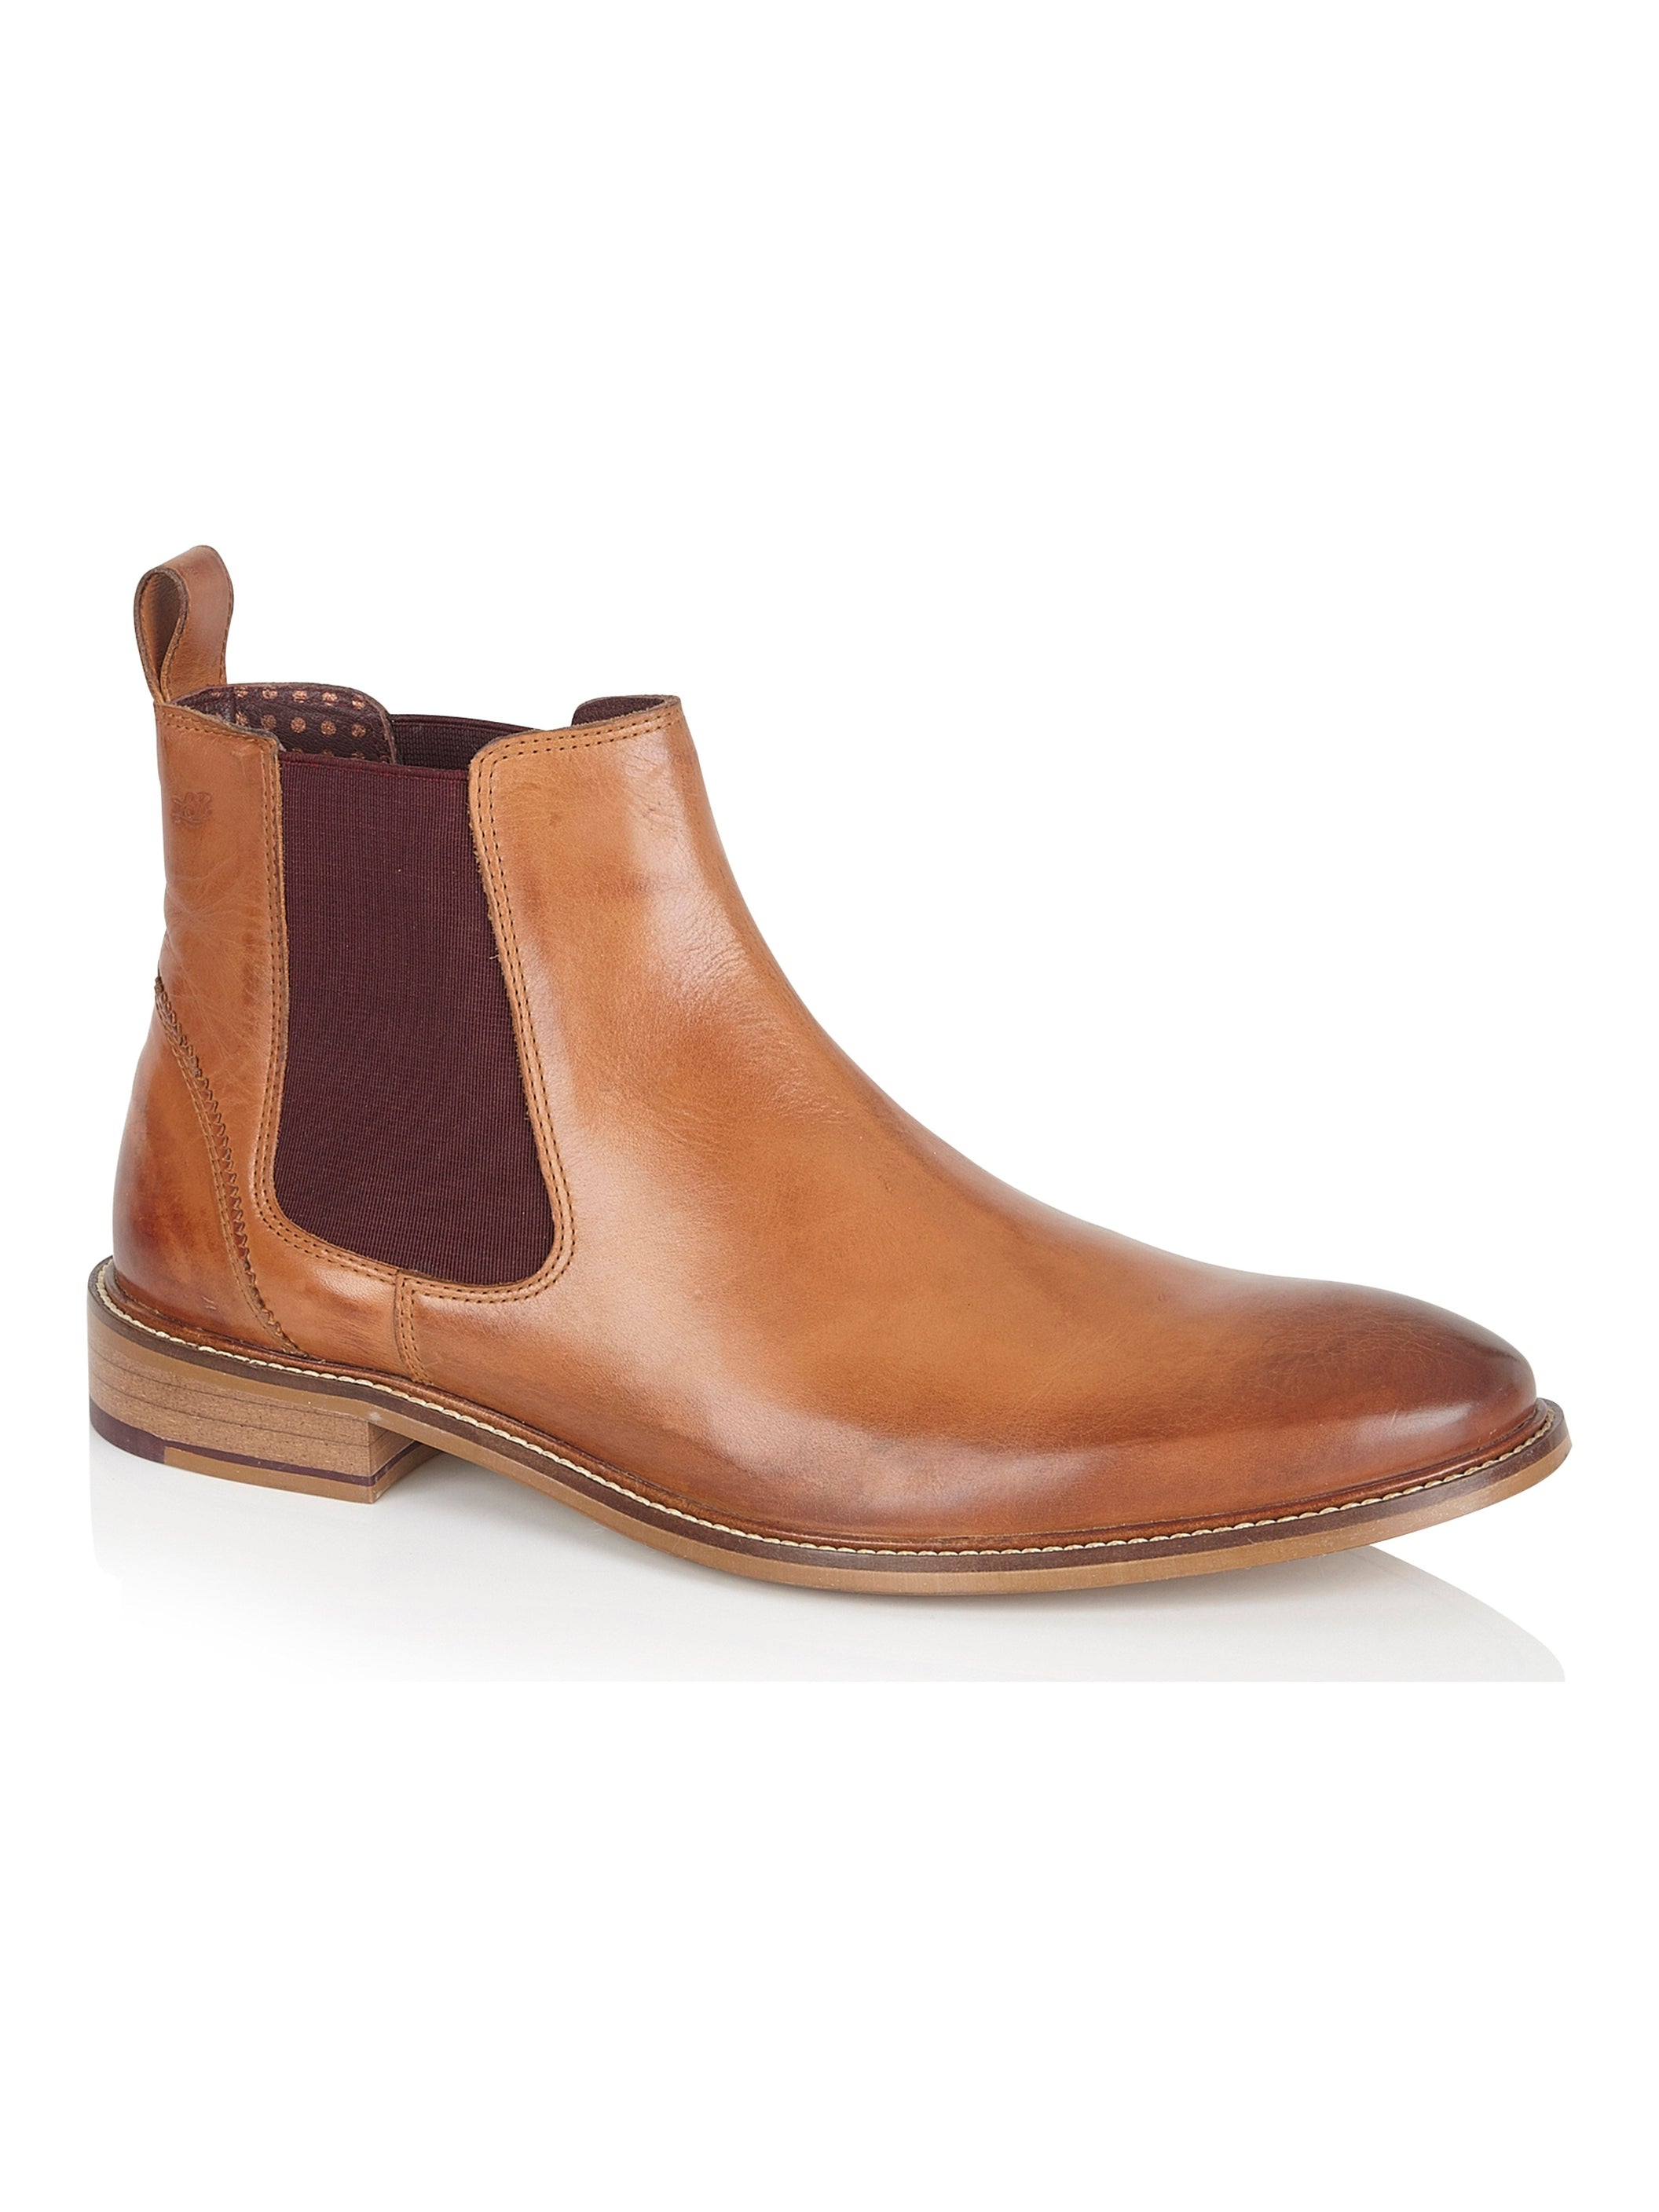 LEATHER CHELSEA BOOTS IN TAN